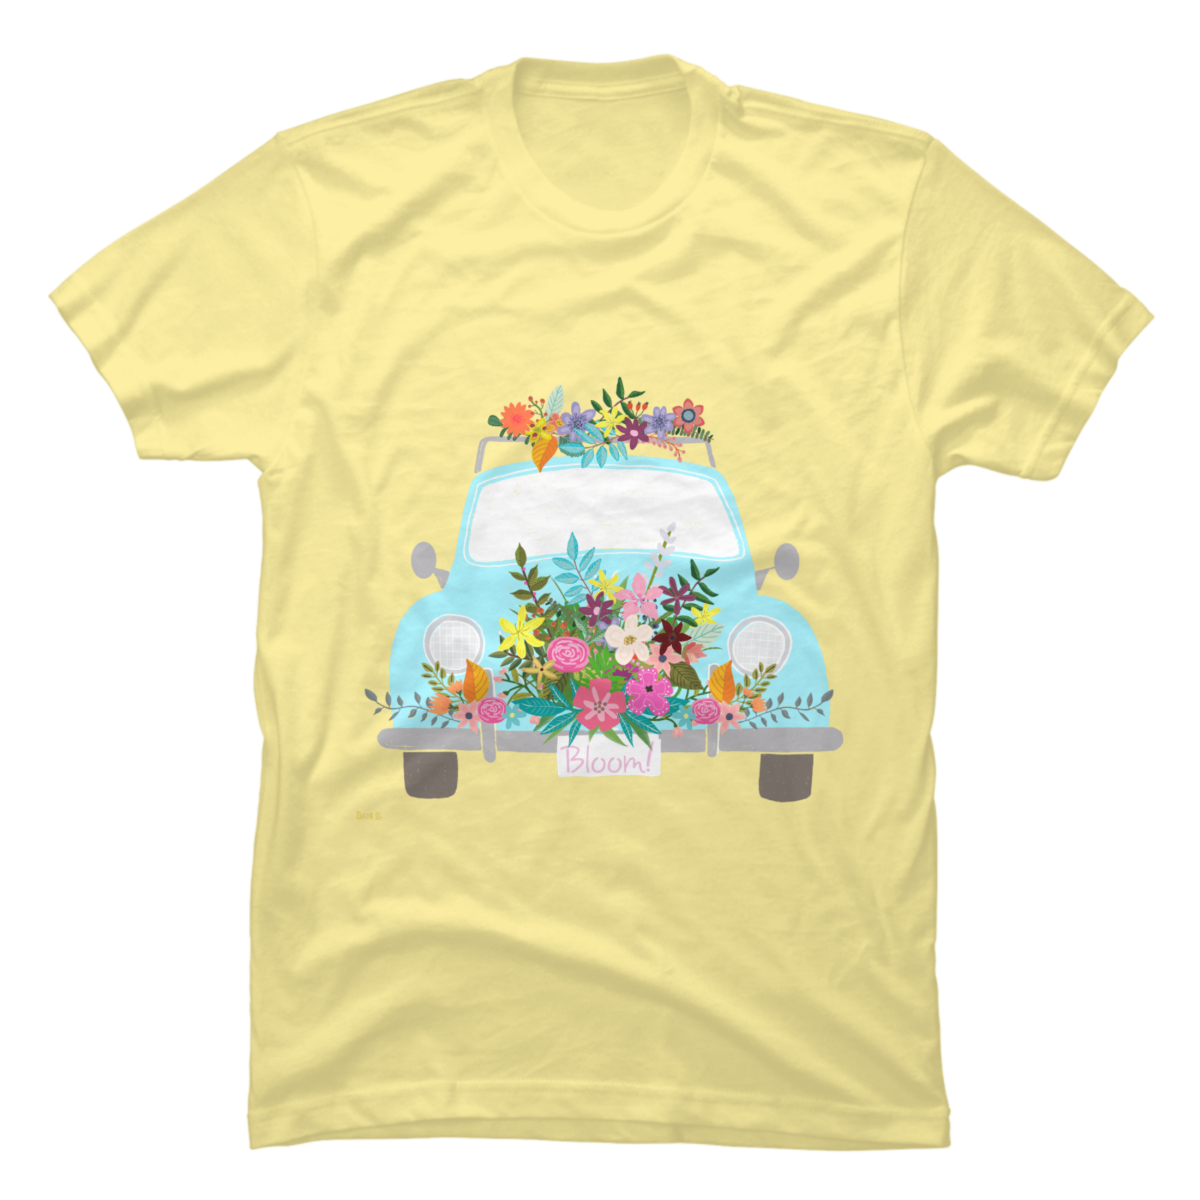 bloom where you are planted shirt